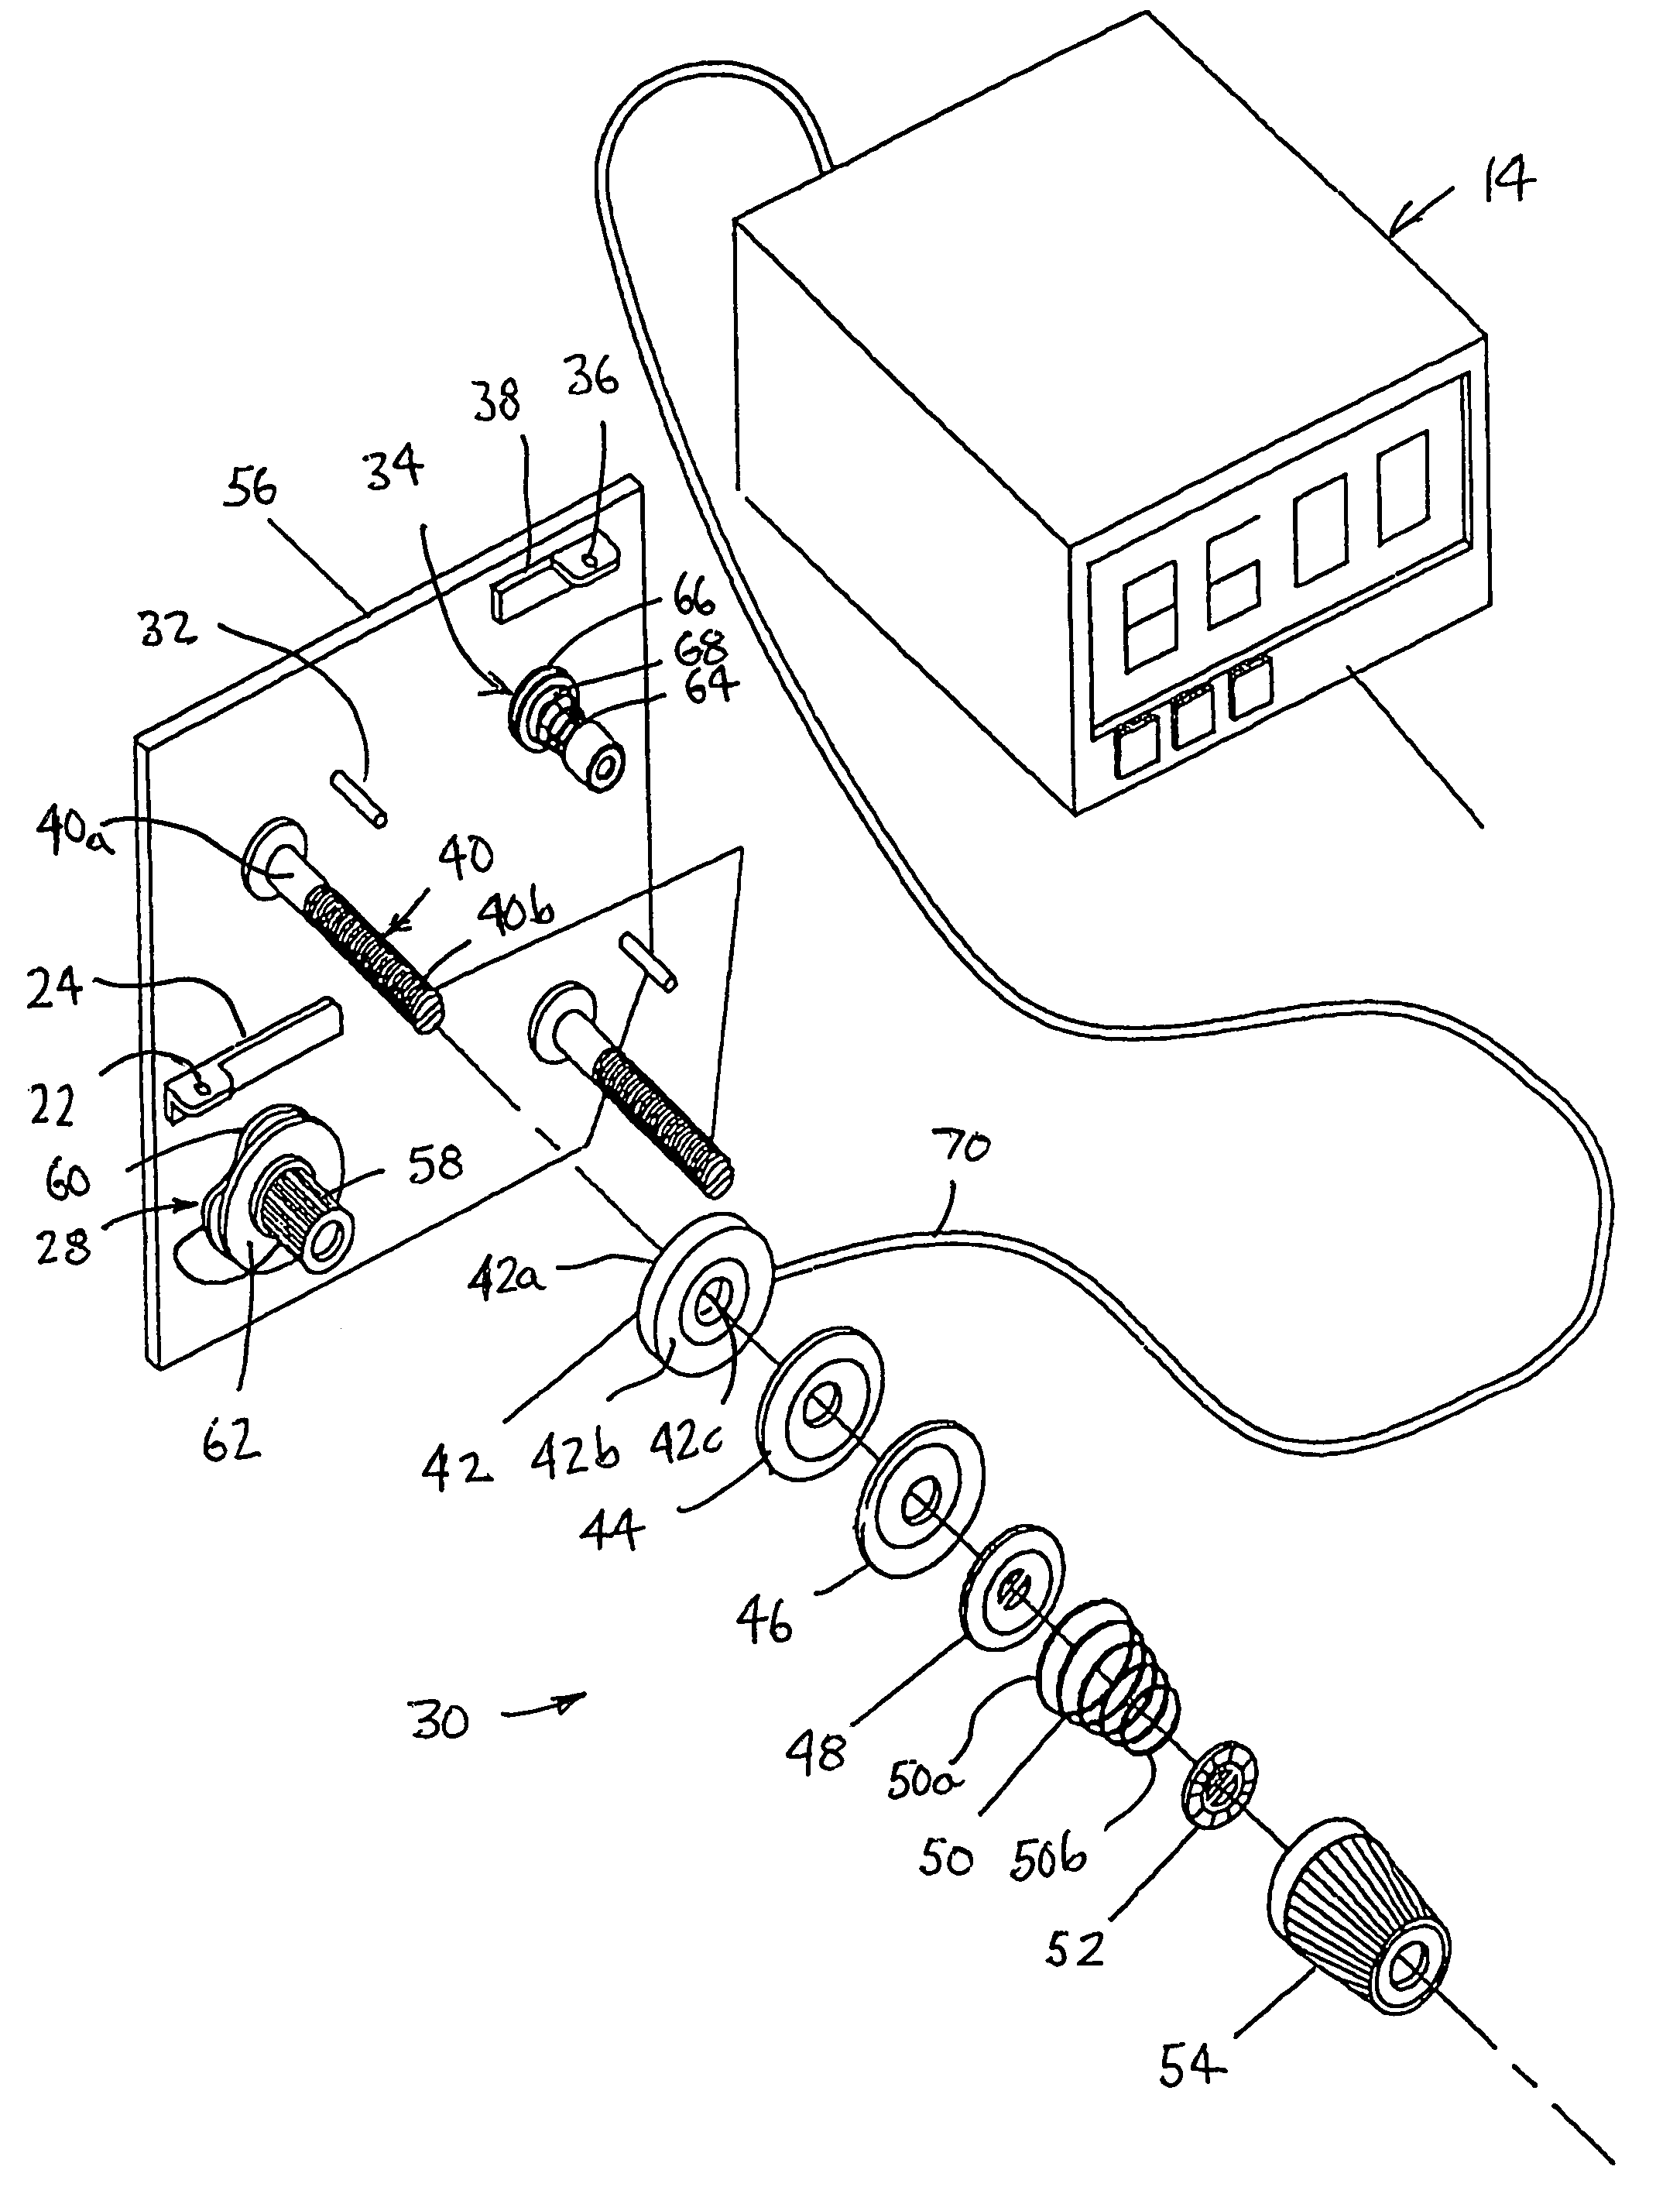 Apparatus for monitoring and controlling thread tensioning force in a sewing machine